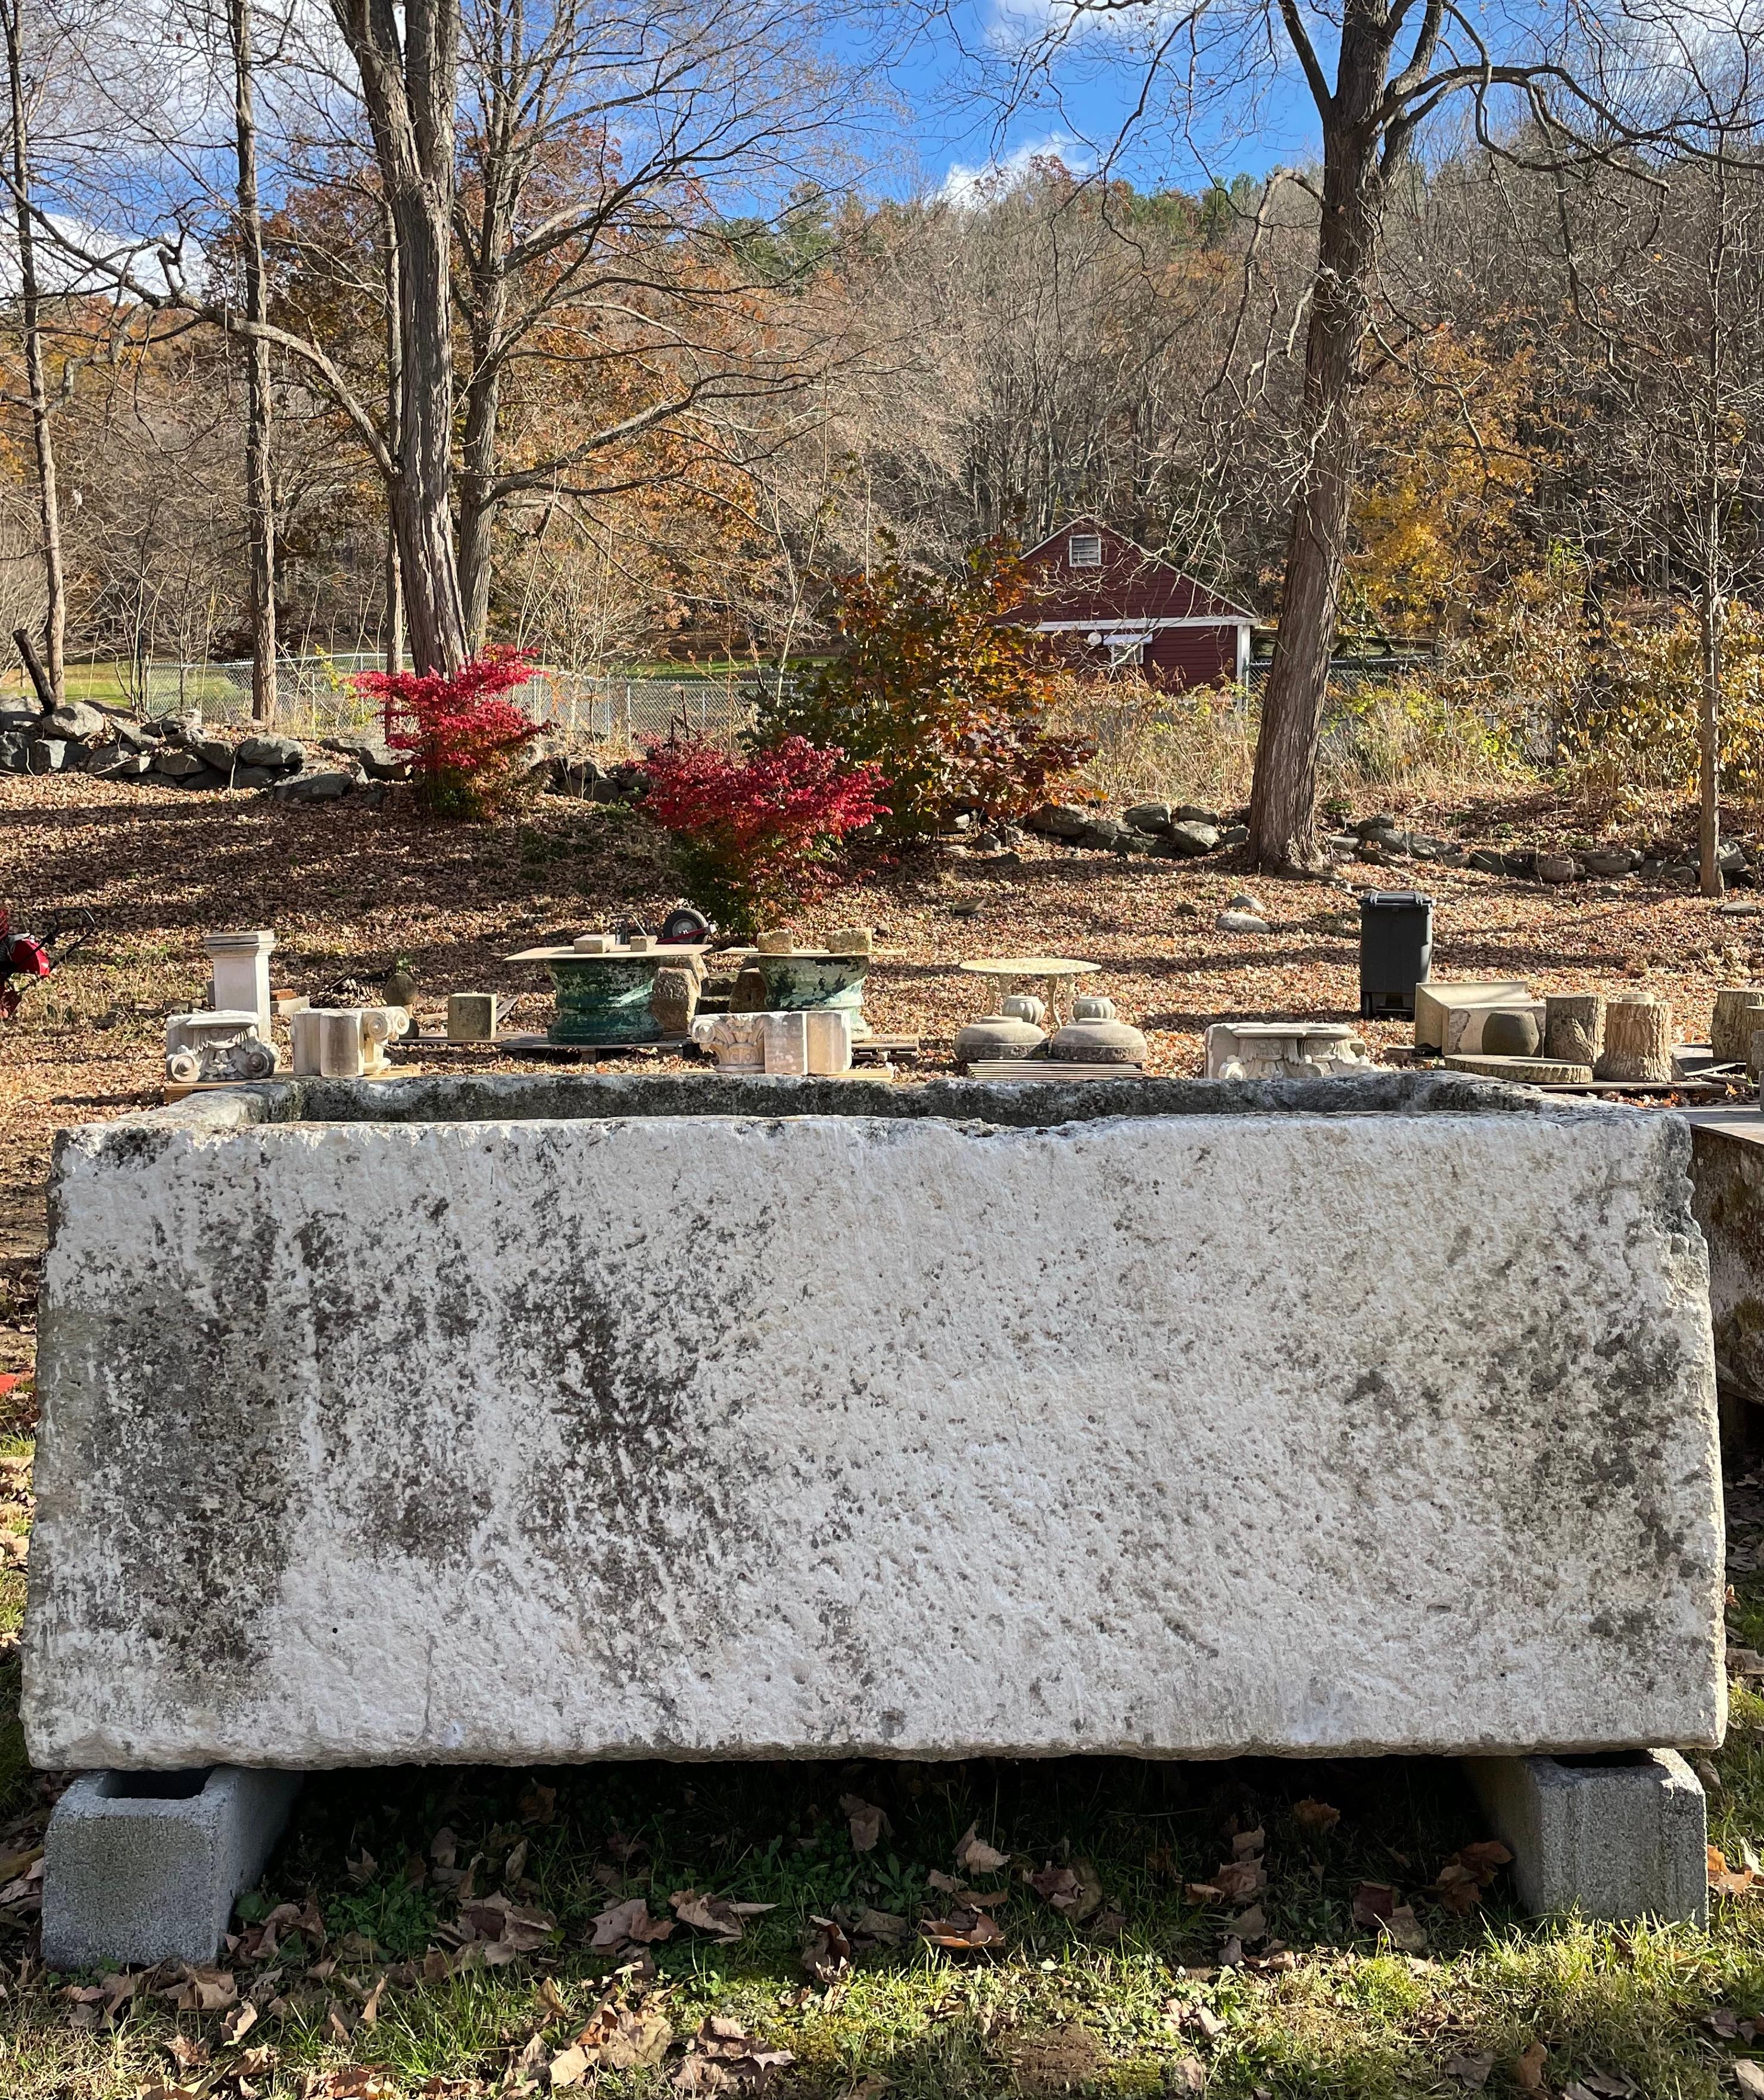 Troughs of this size, age and quality are getting harder and harder to find, especially ones with such a wonderful color and patina. We choose our French limestone troughs for their beautiful patinas and versatility as water features or planters.